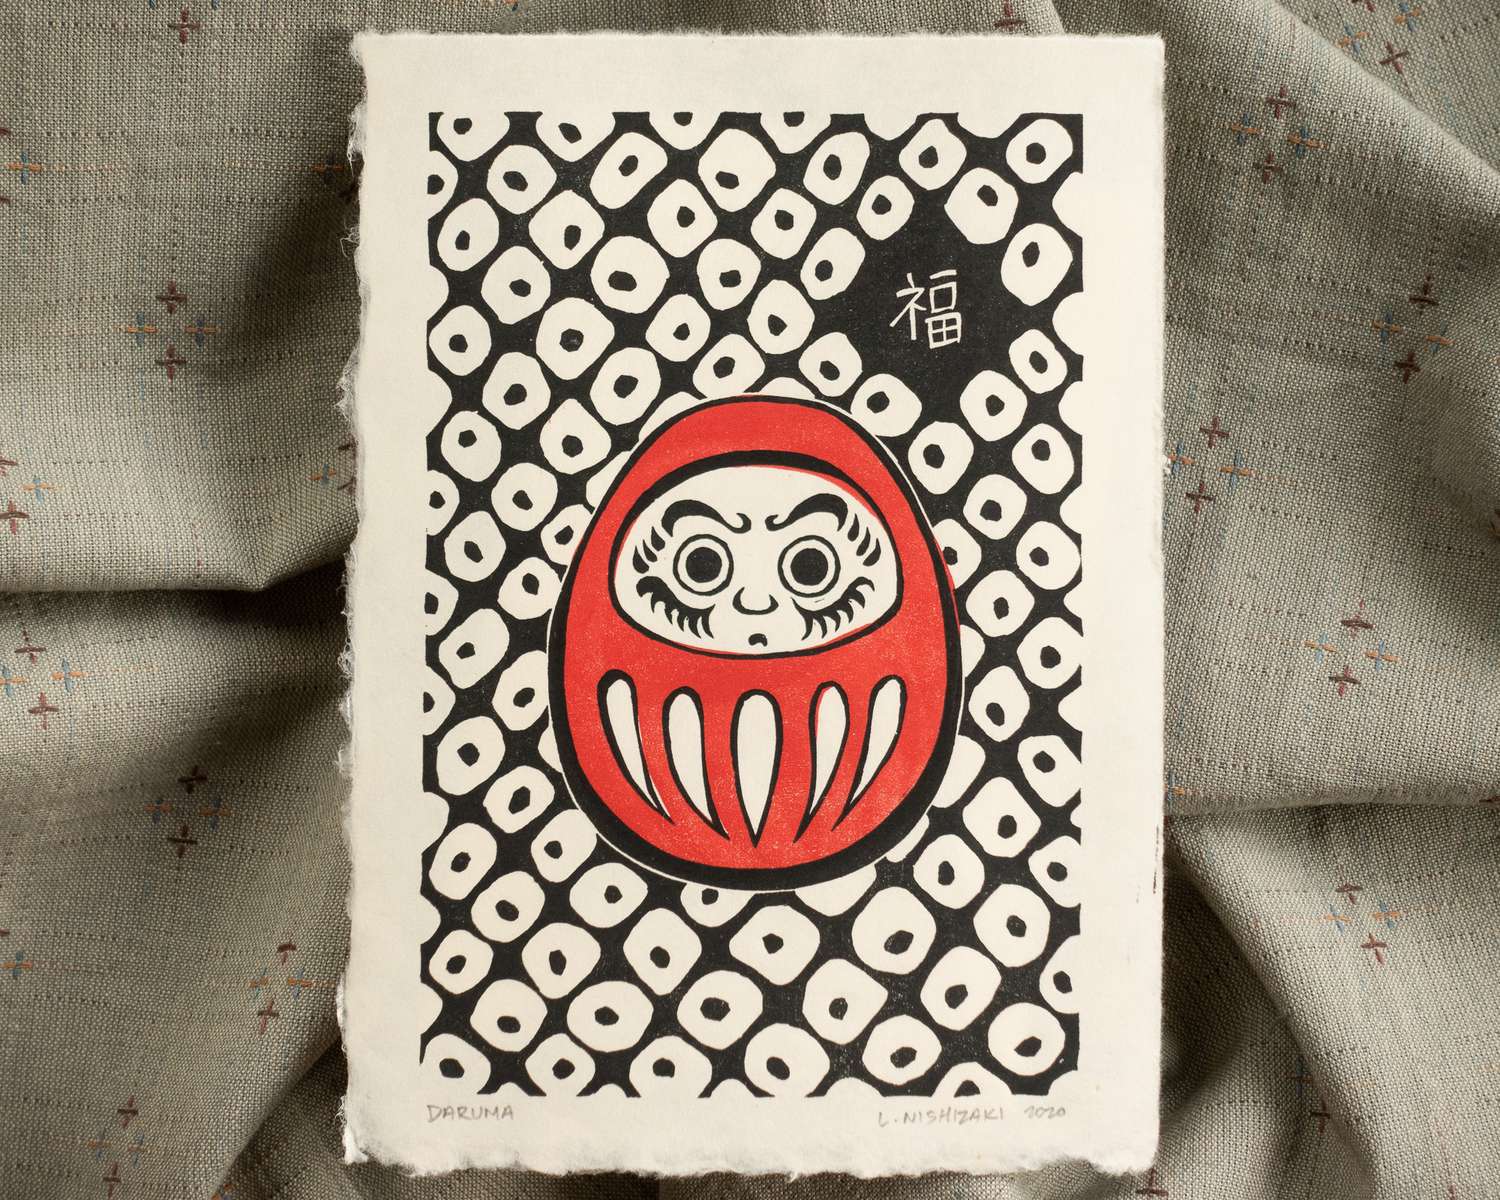 A rectangular print on light brown paper, depicting an egg-shaped Japanese daruma doll in red, and an all-over geometric background pattern. A Japanese kanji character meaning good fortune is in the top right.